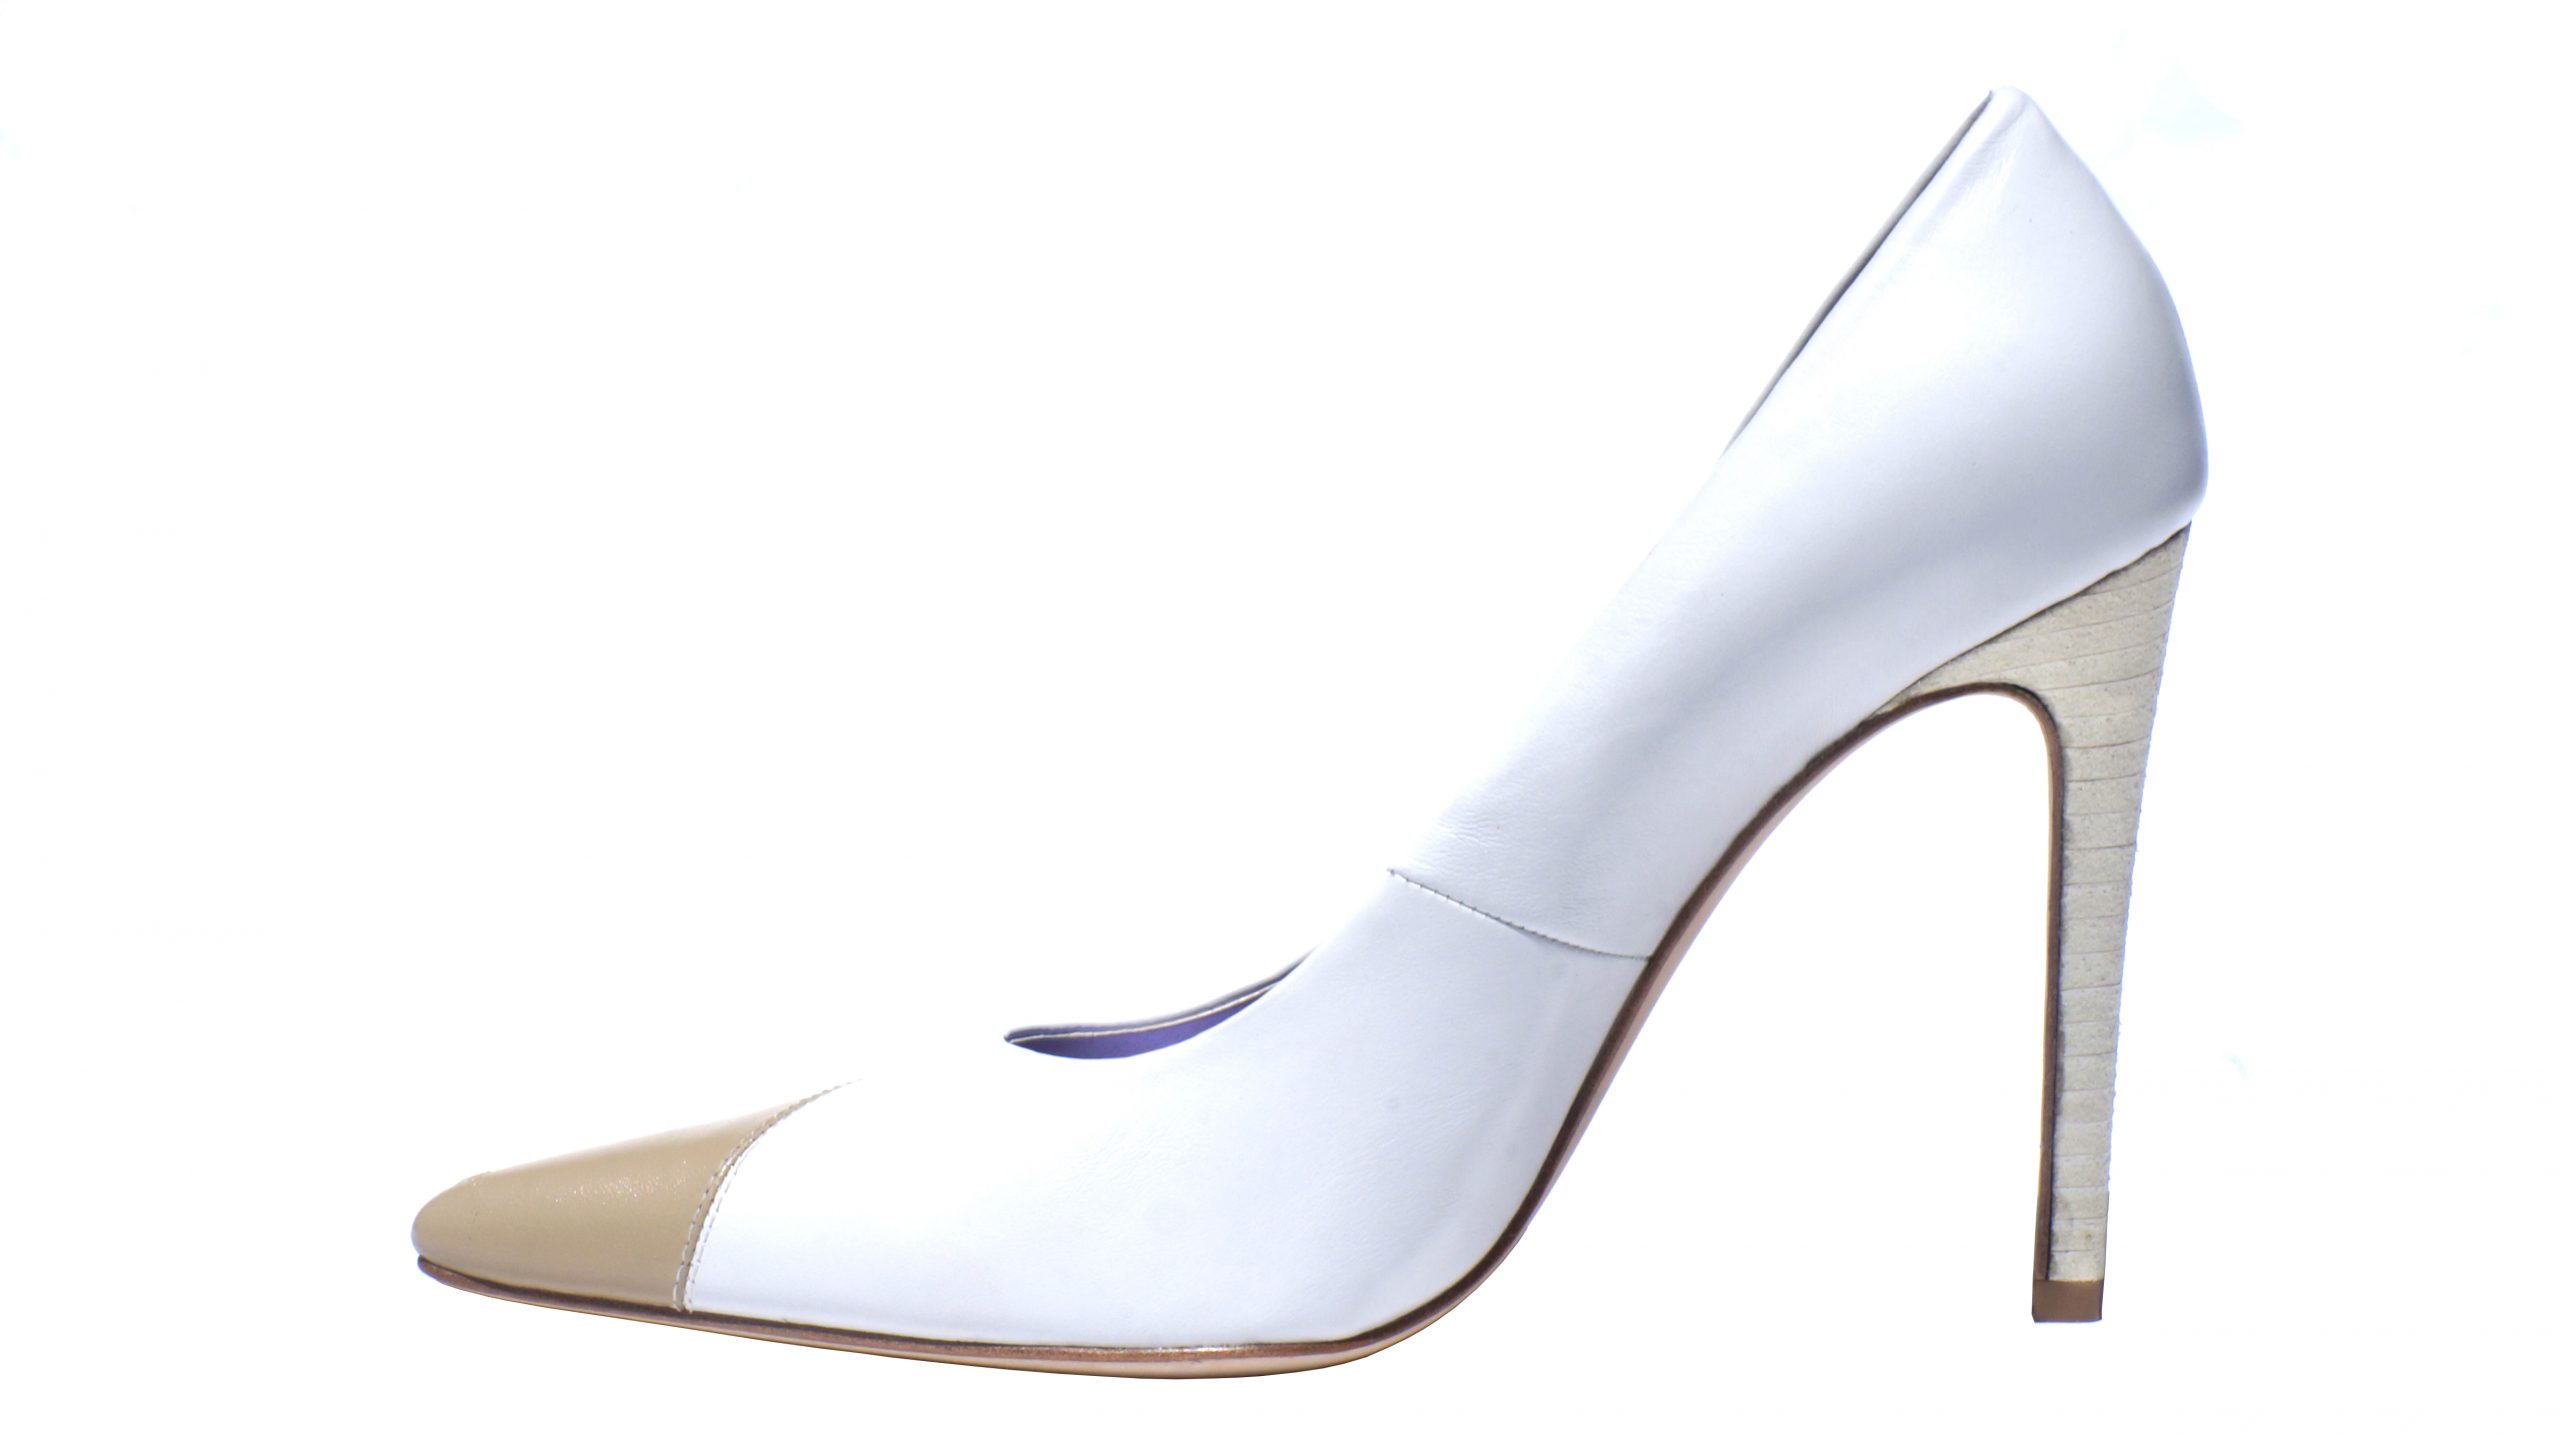 Ivory and cream asymmetrical point toe pump, 4 inch heel